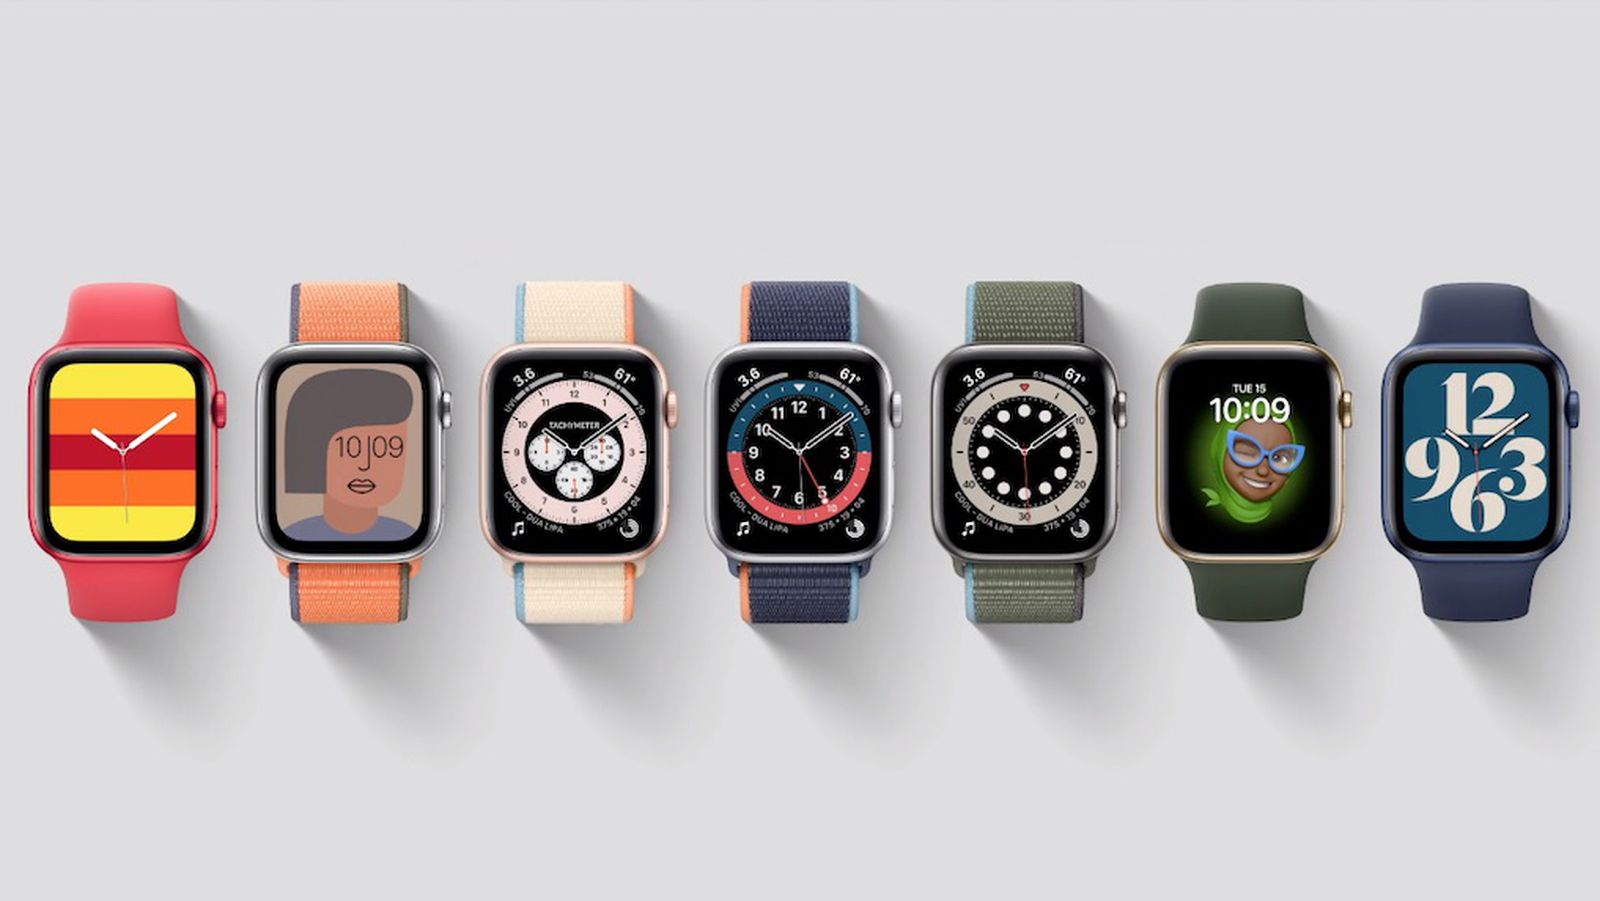 How to download and install custom watch faces on Apple Watch?